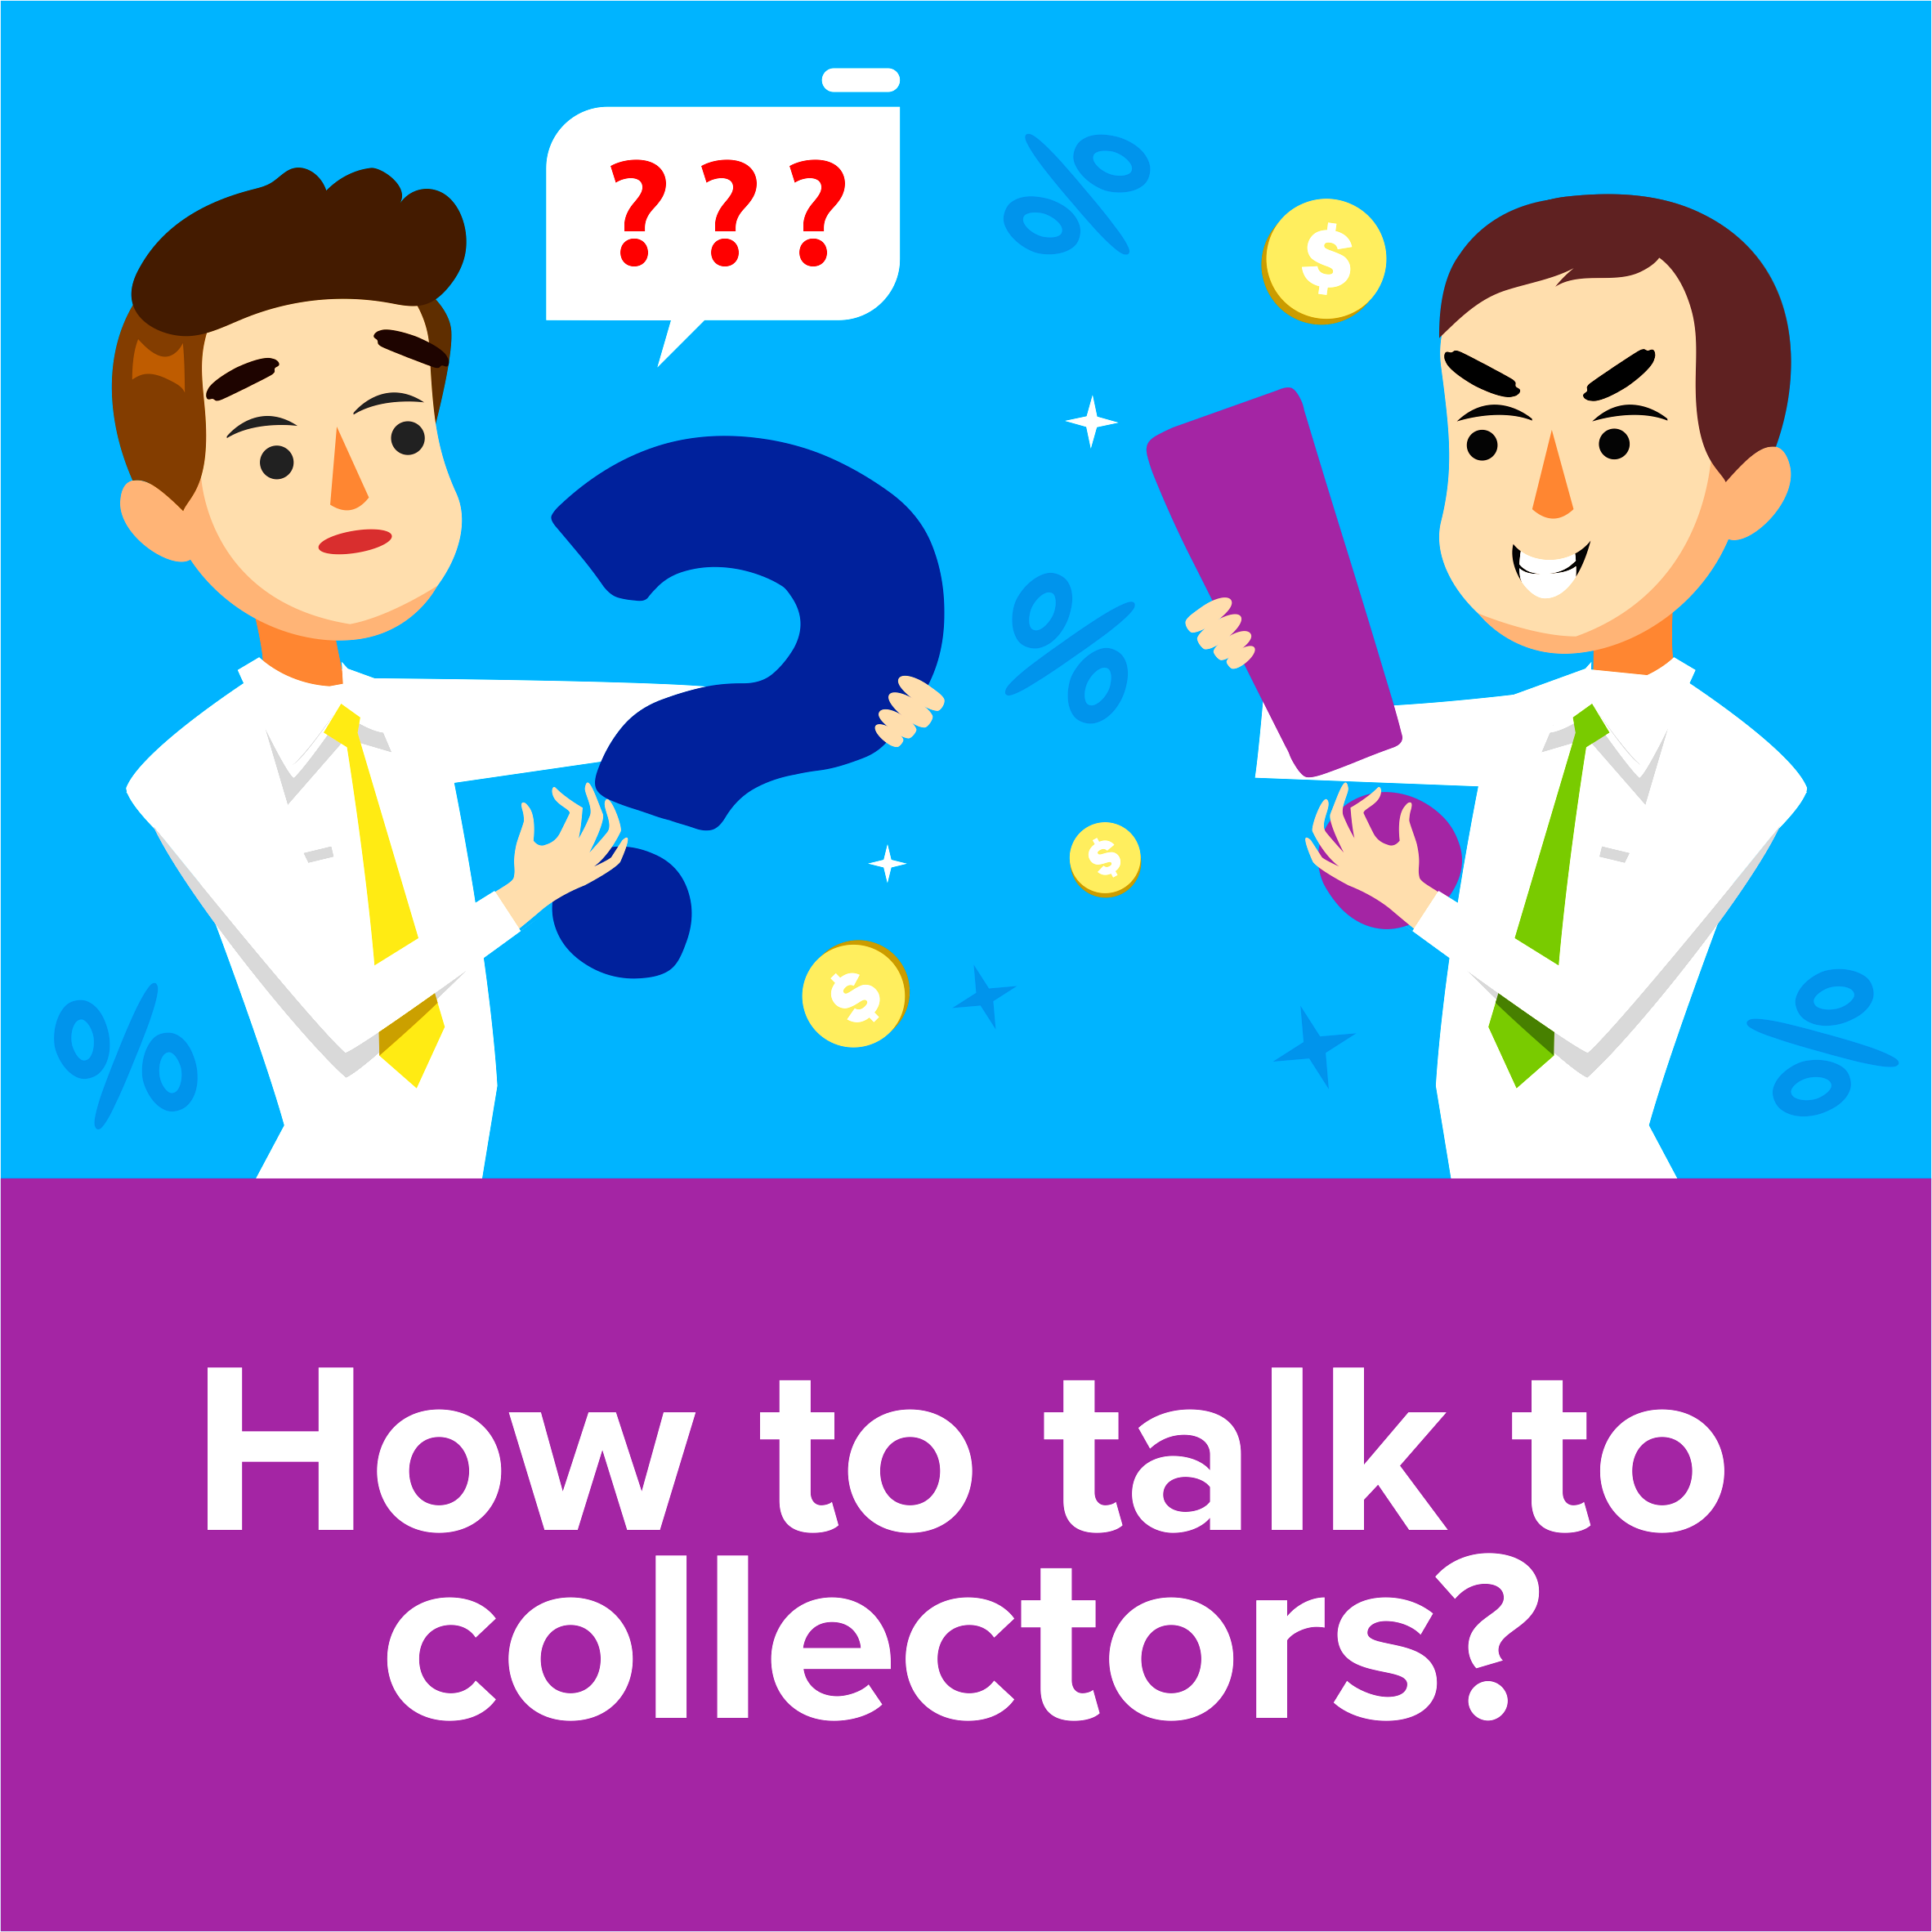 How to Talk to Collectors?